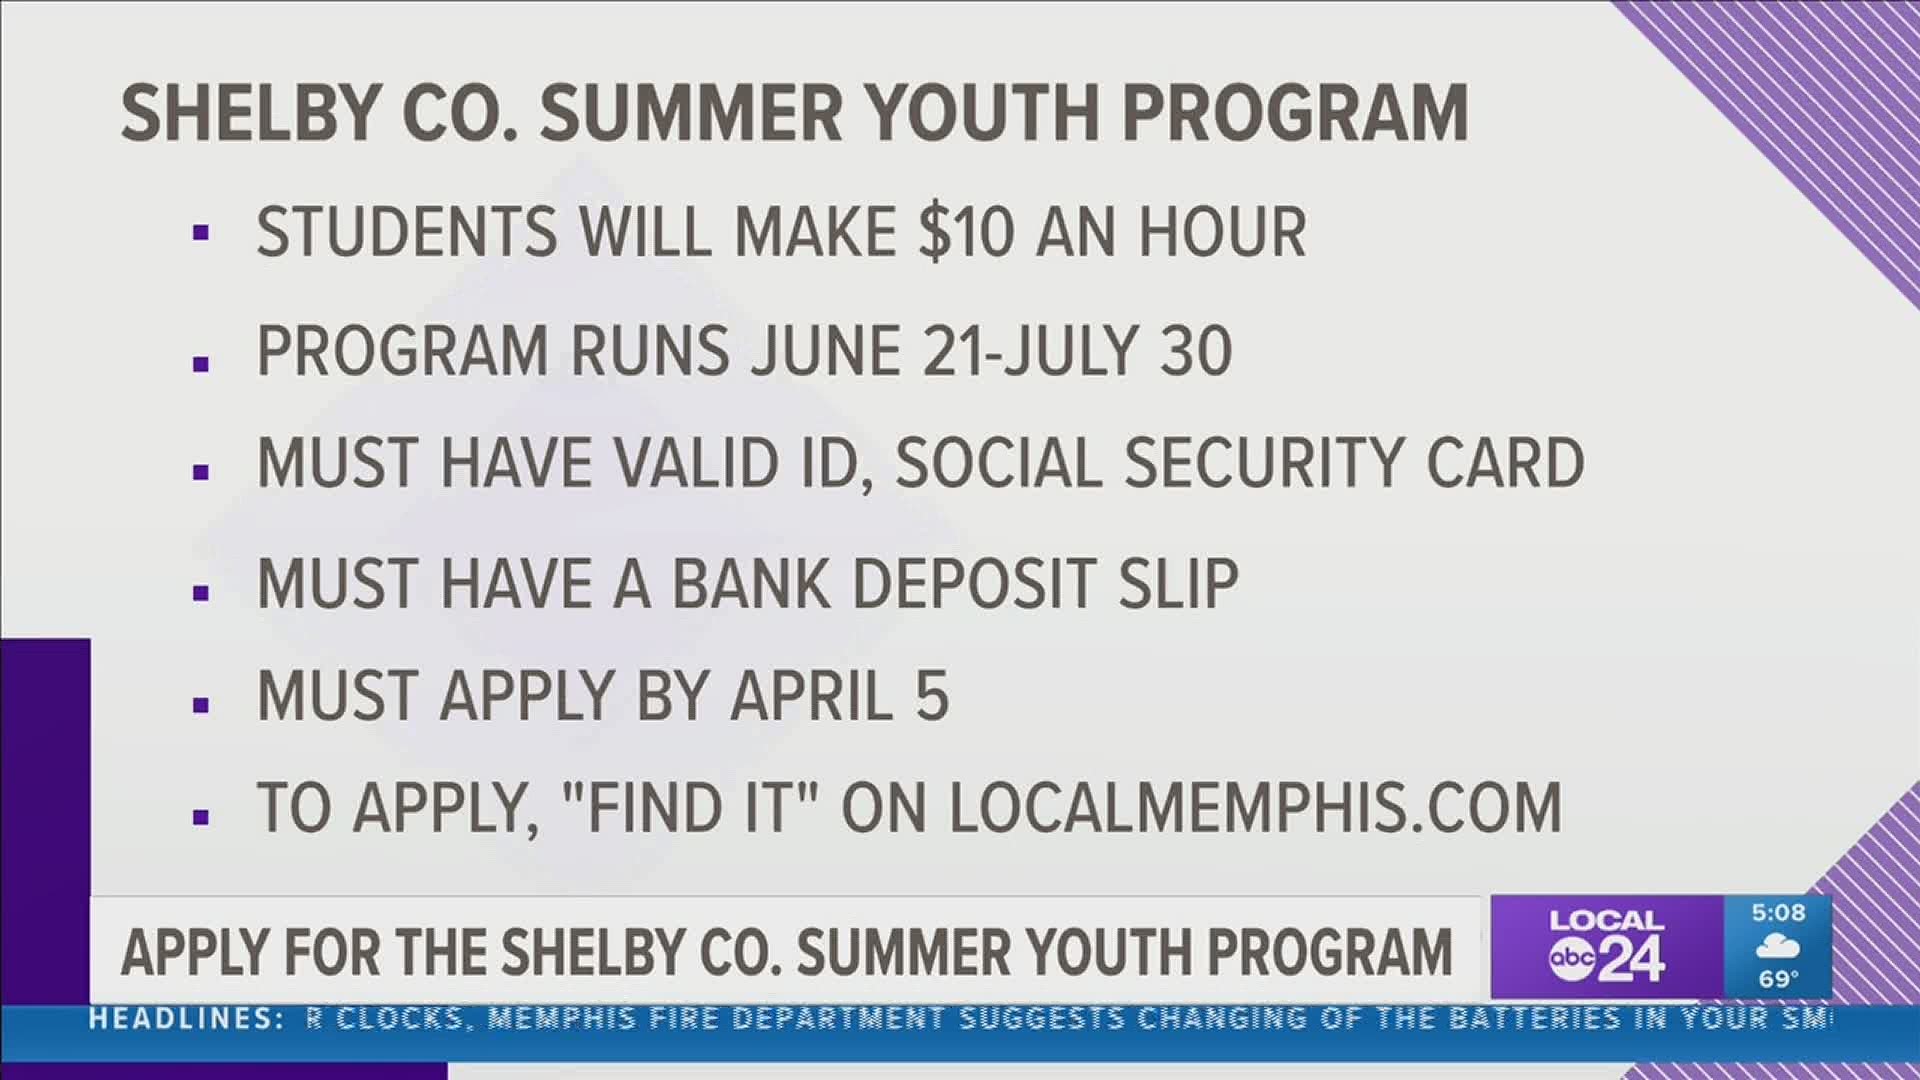 The eight-week summer work experience program is for those in Shelby County ages 18-24, who can earn $12 per hour.